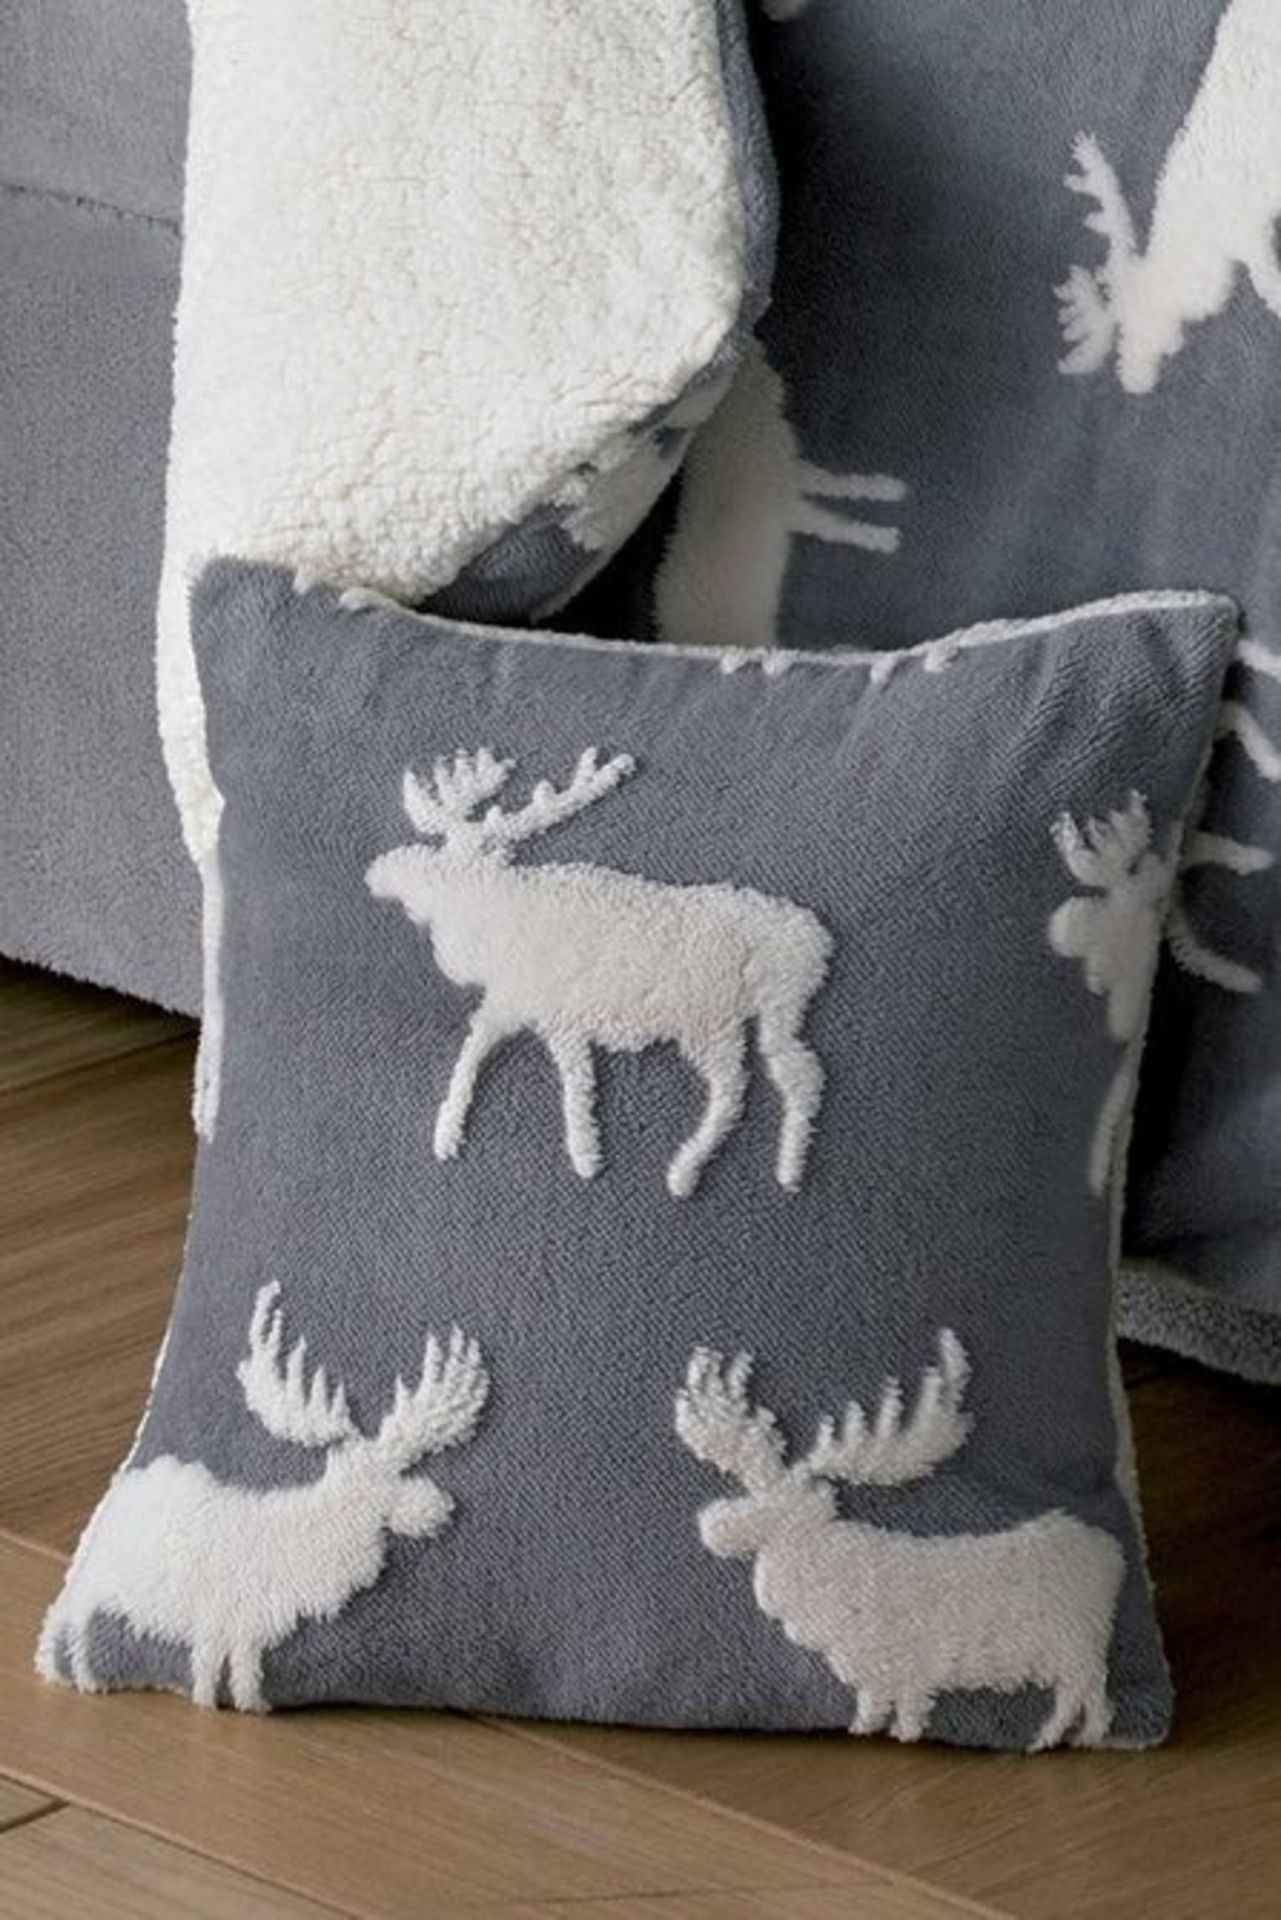 1 BAGGED WARM AND COSY TEDDY 3D STAG CUSHION COVER IN GREY (PUBLIC VIEWING AVAILABLE)